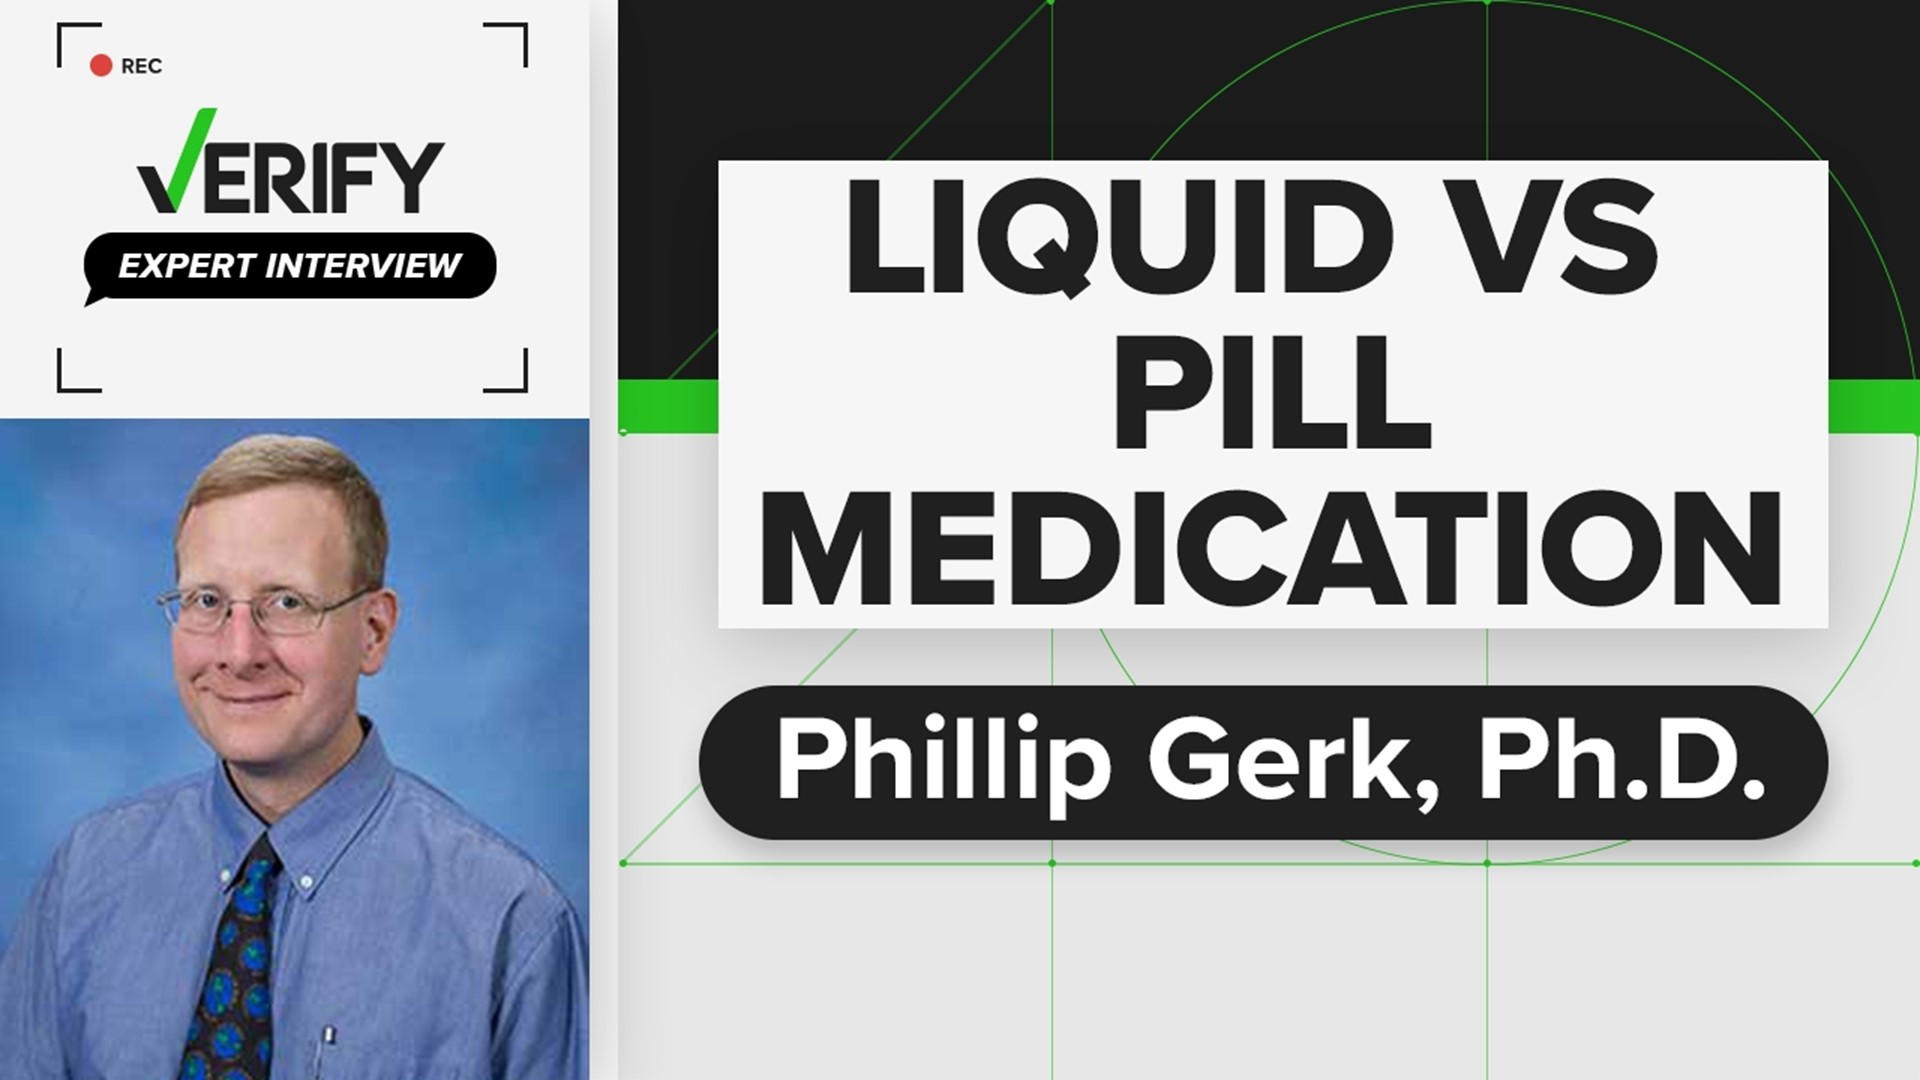 Phillip Gerk , Ph.D., is a professor at the School of Pharmacy at Virginia Commonwealth University and explains the differences between liquid vs pill medication.